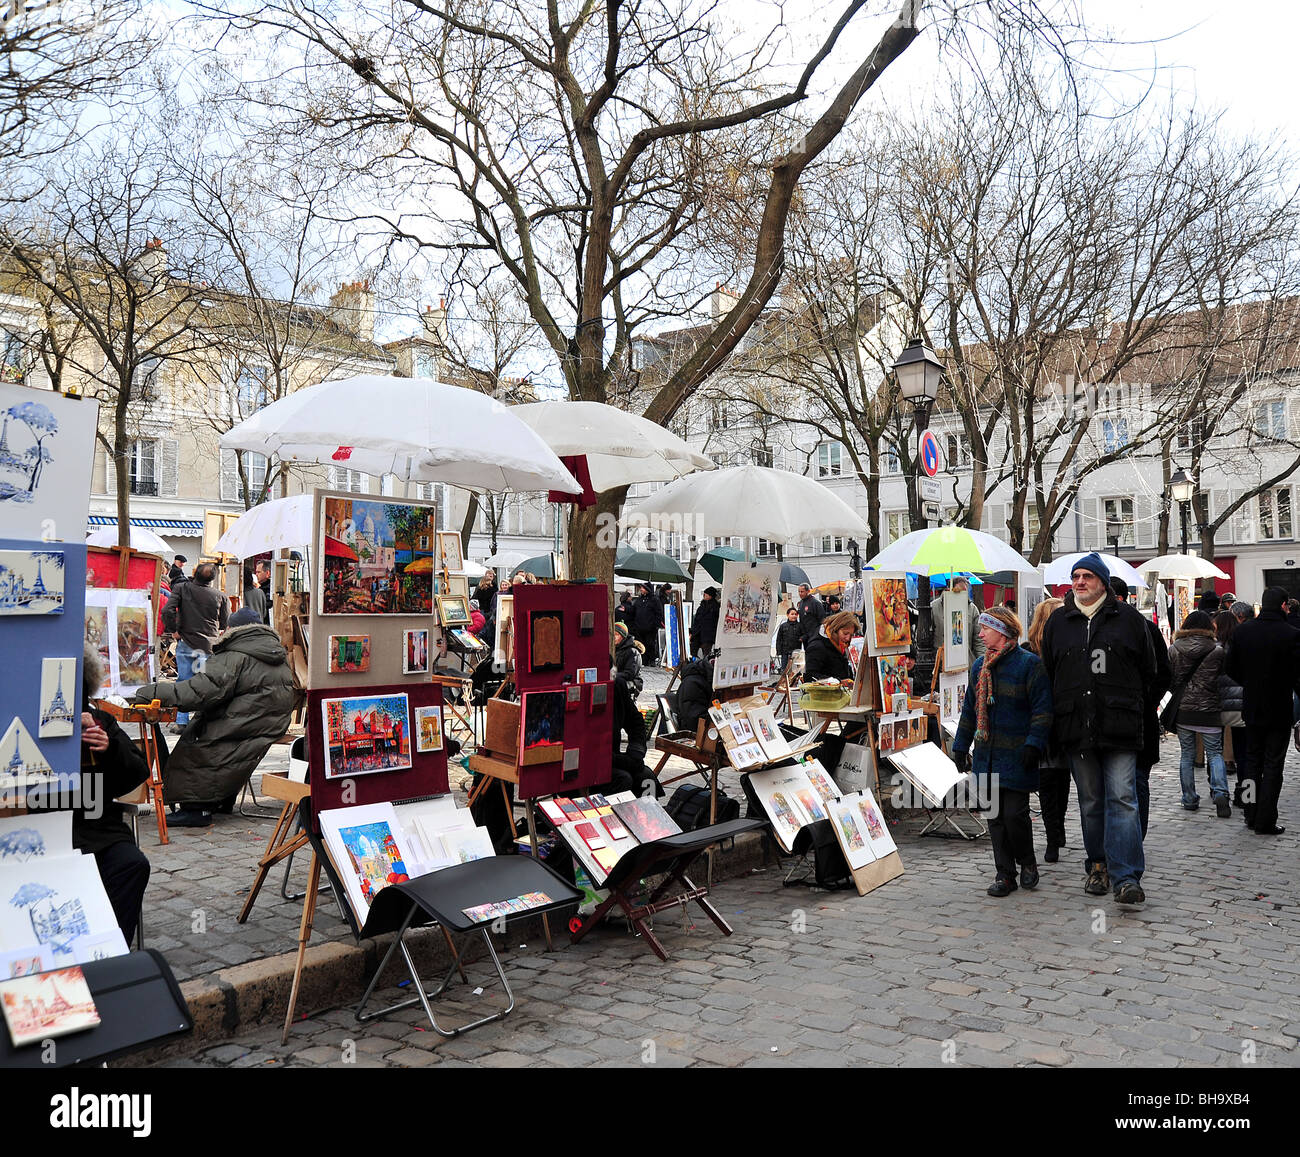 Paris, France - Tourists and street artists in the Montmartre area ...